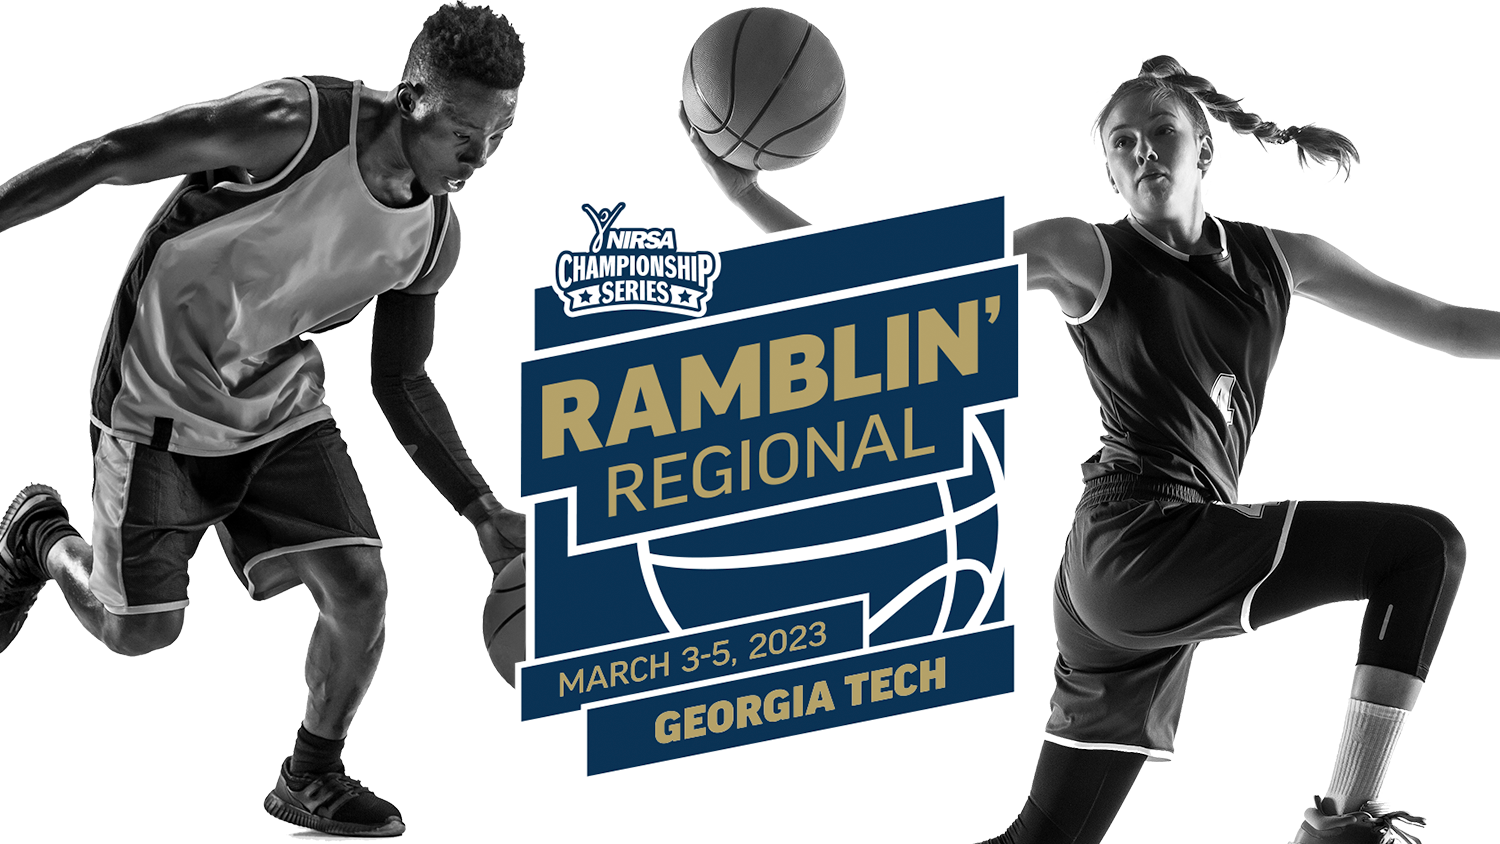 A male and female basketball player at each side of the event logo that reads: NIRSA Championship Series, Ramblin Regional, March 3-5, 2023. Georgia Tech  